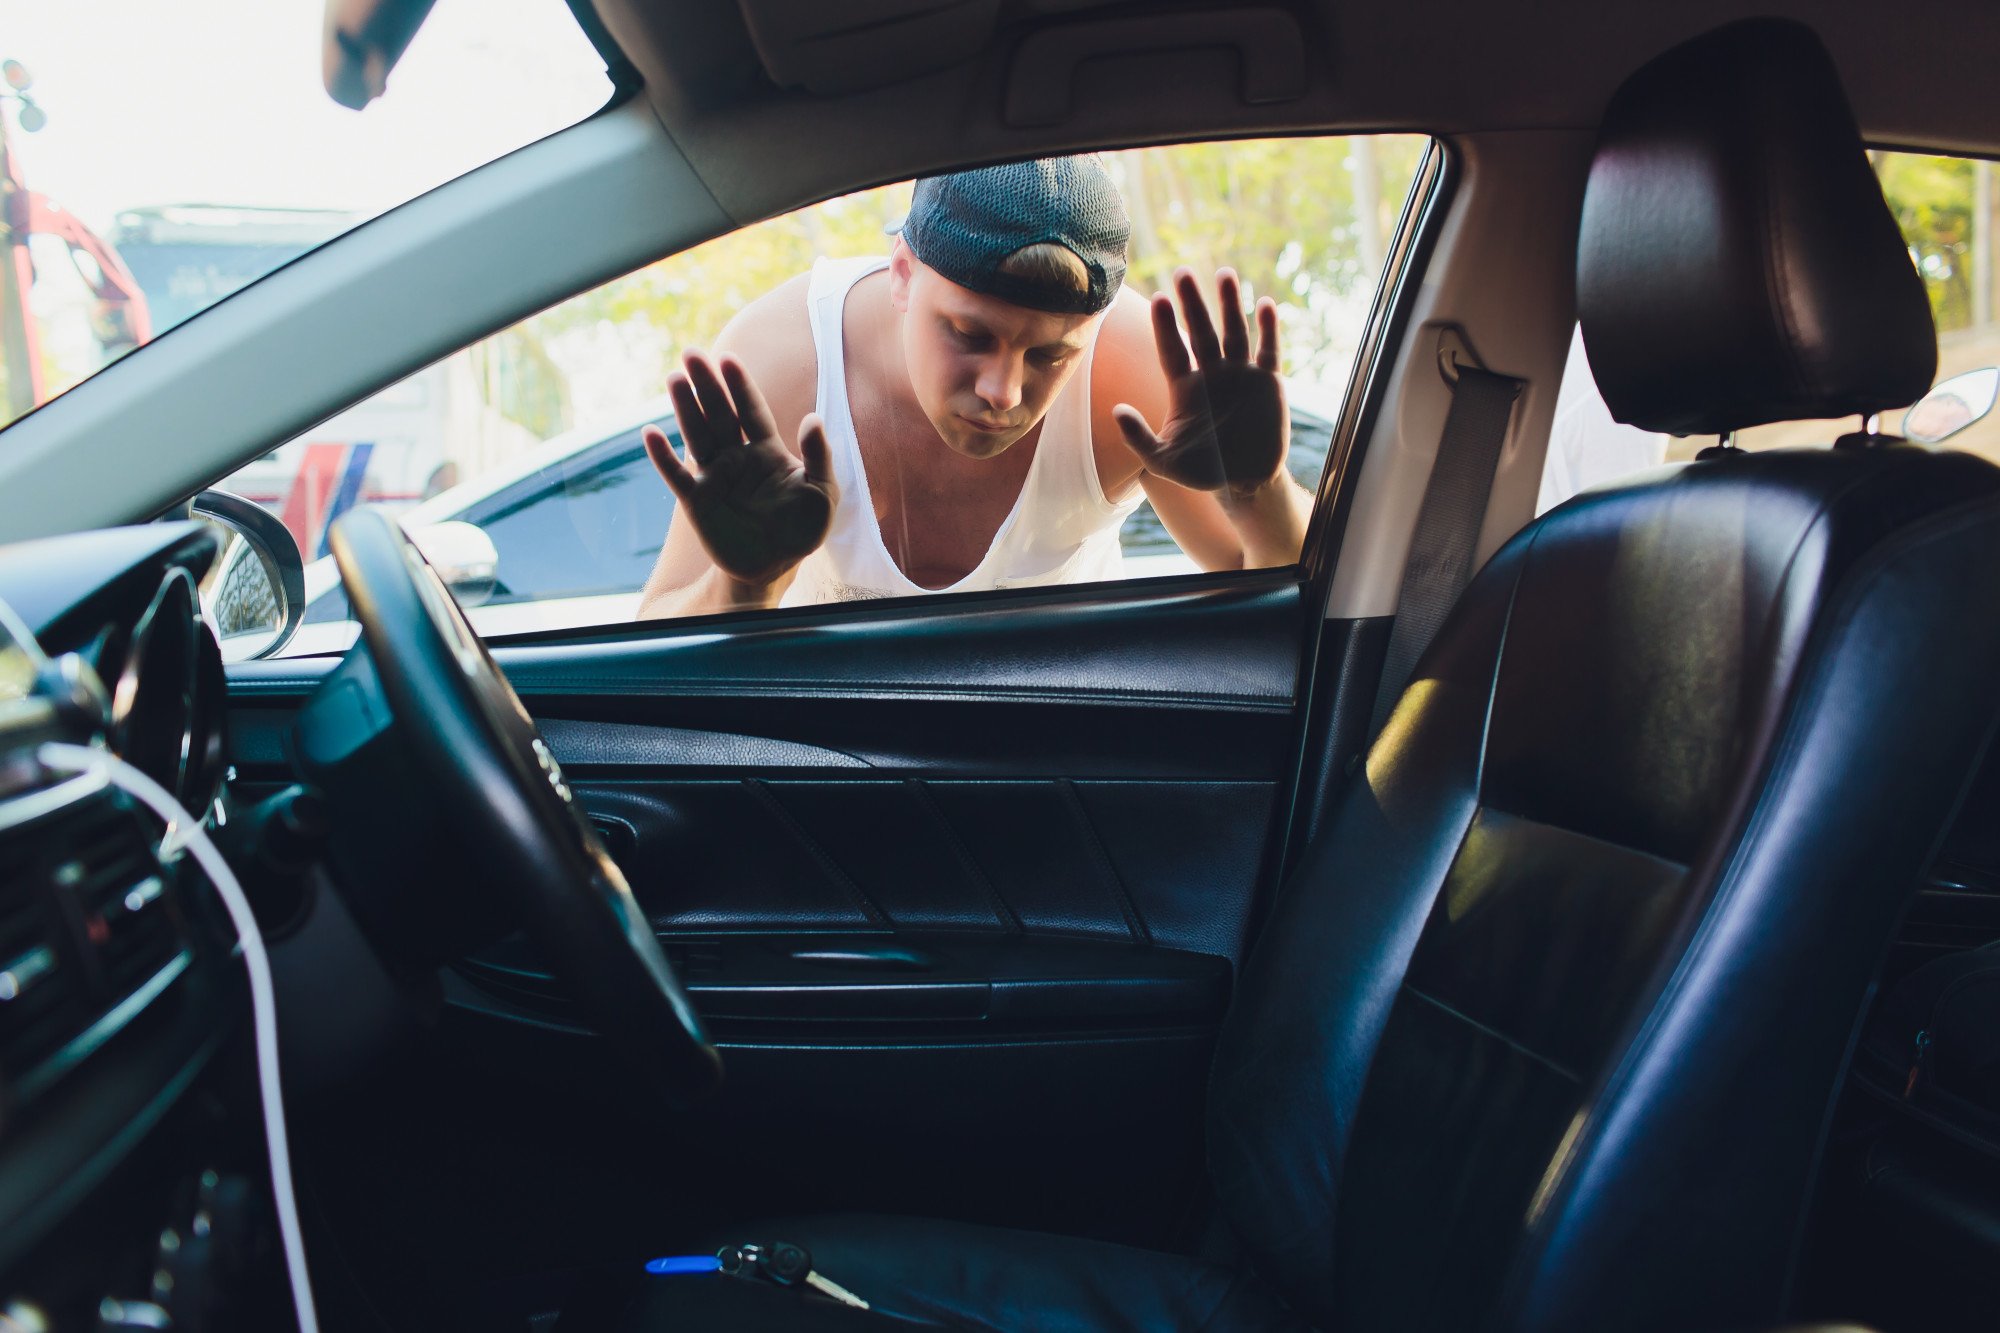 Got Locked Out of Your Car? How to Get Back In